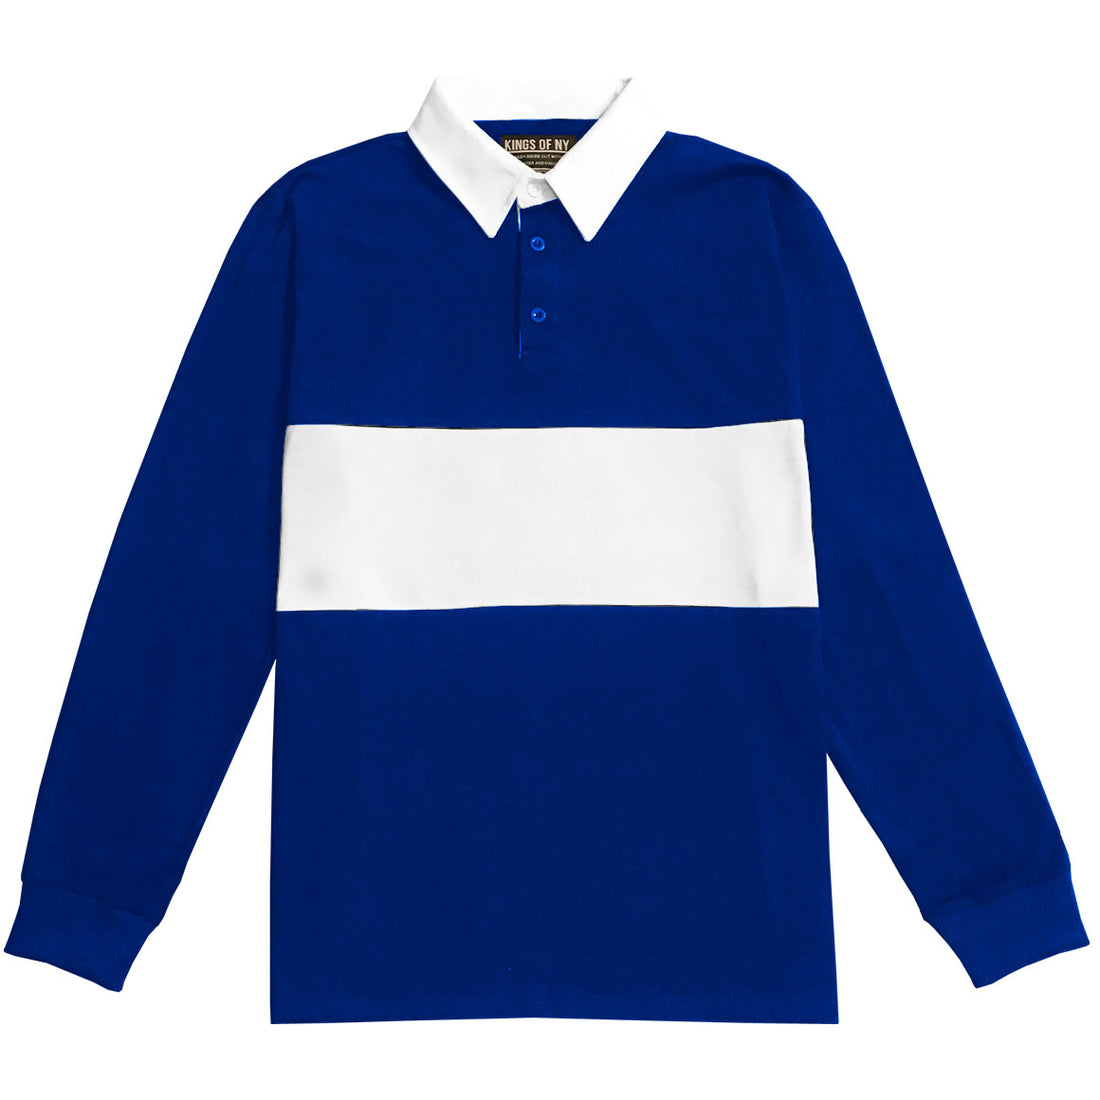 Mens Royal Blue and White Striped Long Sleeve Polo Rugby Shirt